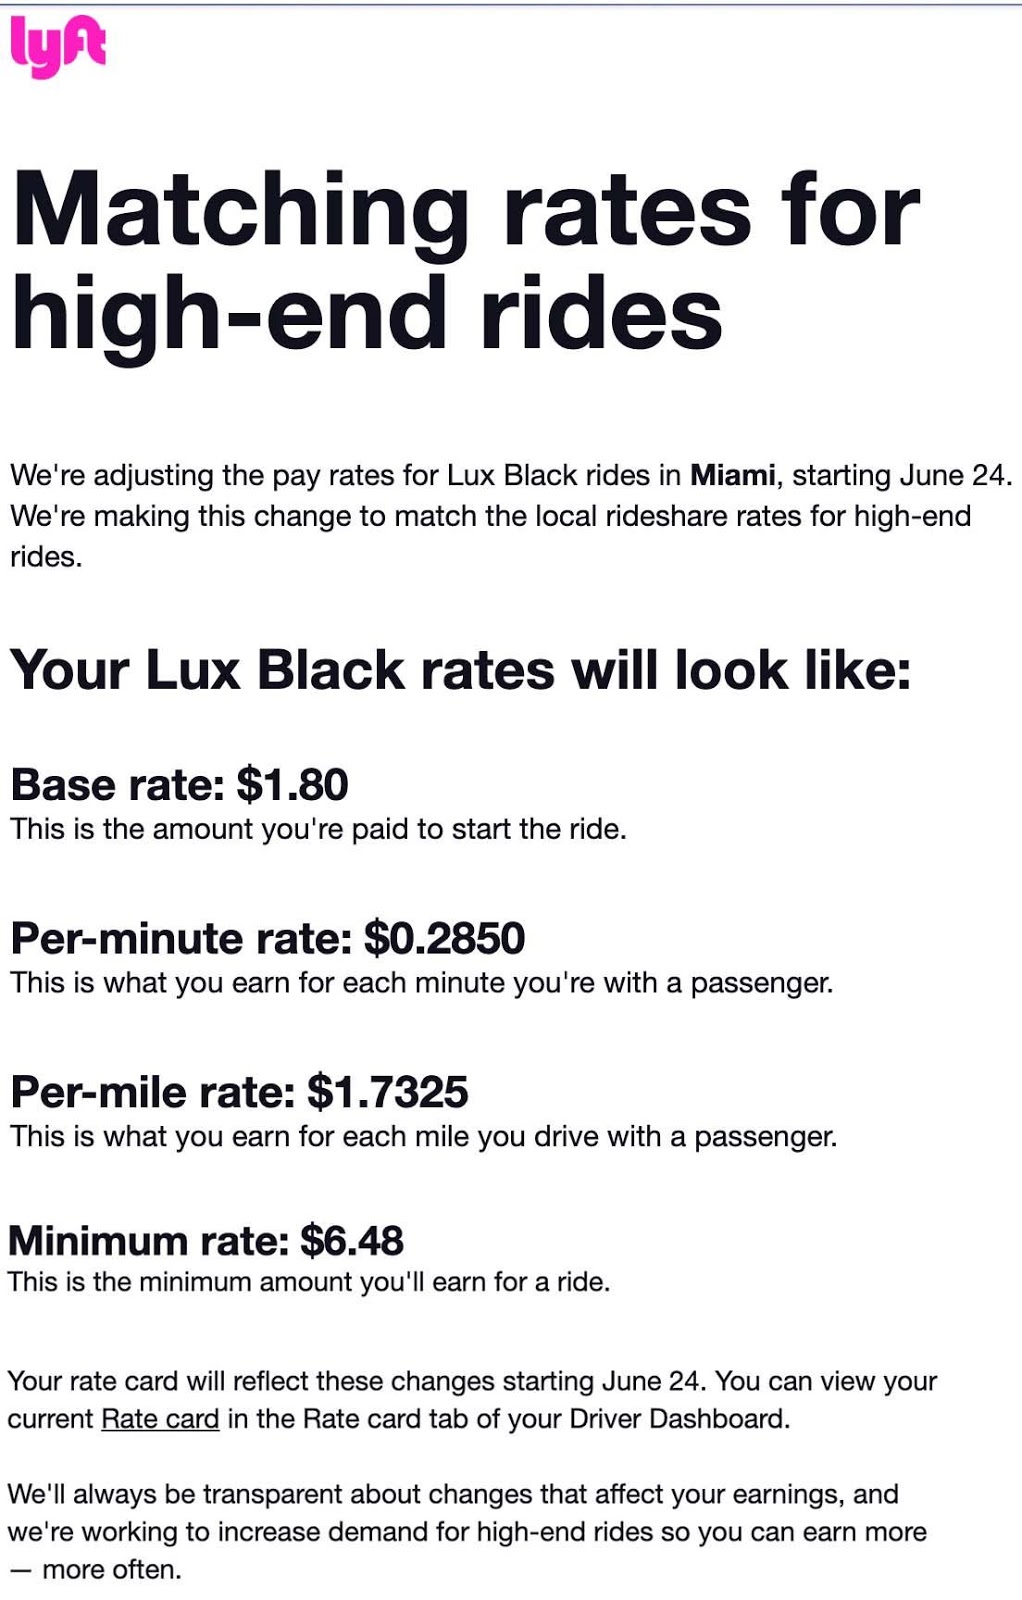 Lyft To Cut XL And Lux Black Rates Across the Country